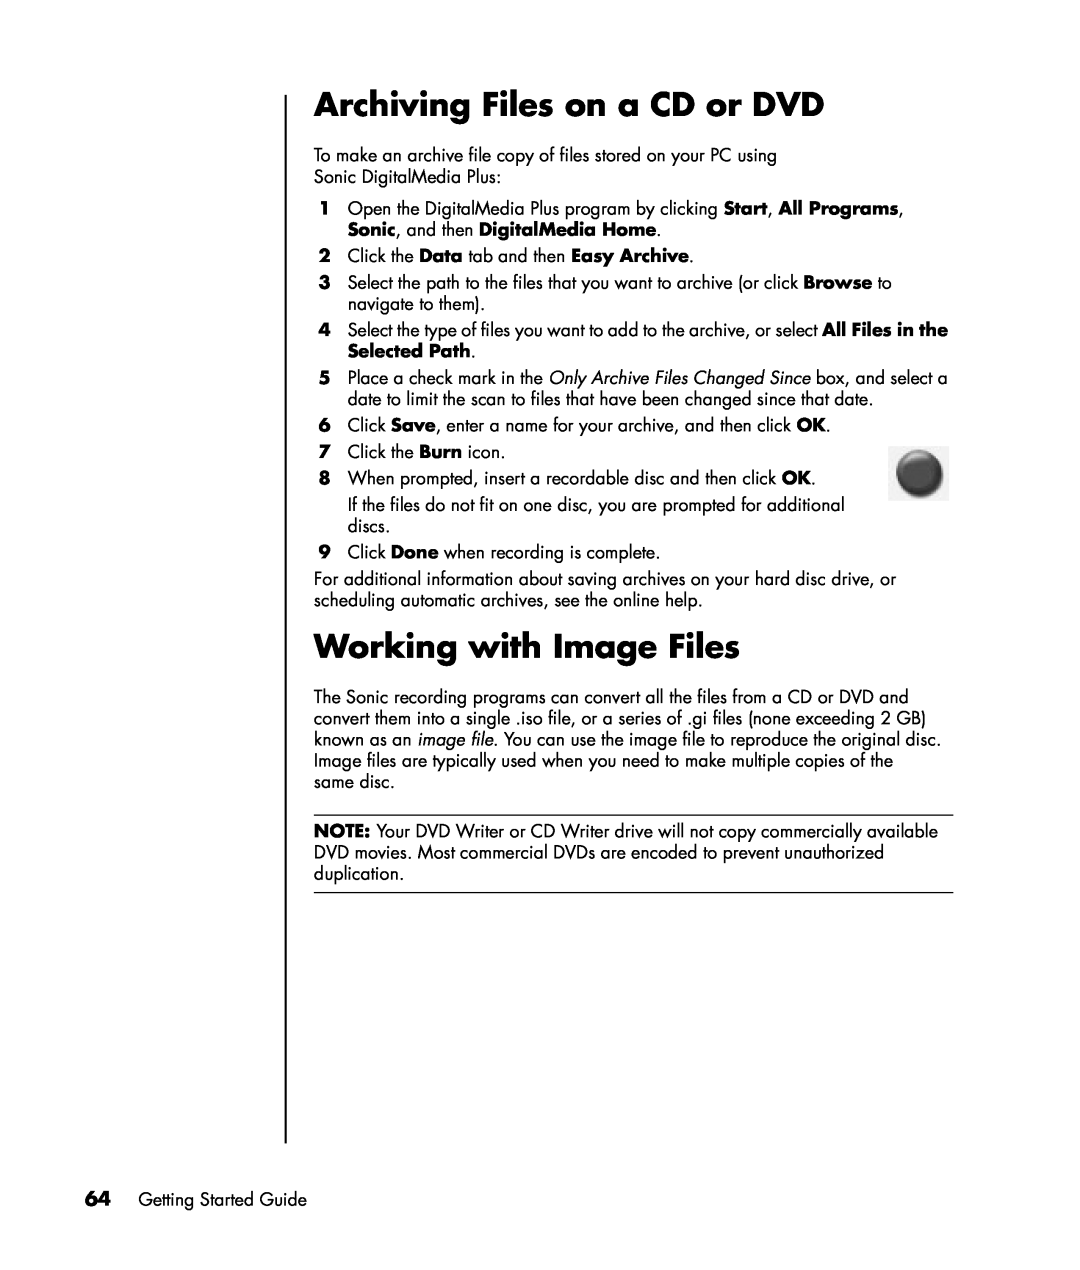 HP a1116x, a1163w, a1173w, a1140n, a1133w, a1102n, a1104x, a1106n manual Archiving Files on a CD or DVD, Working with Image Files 